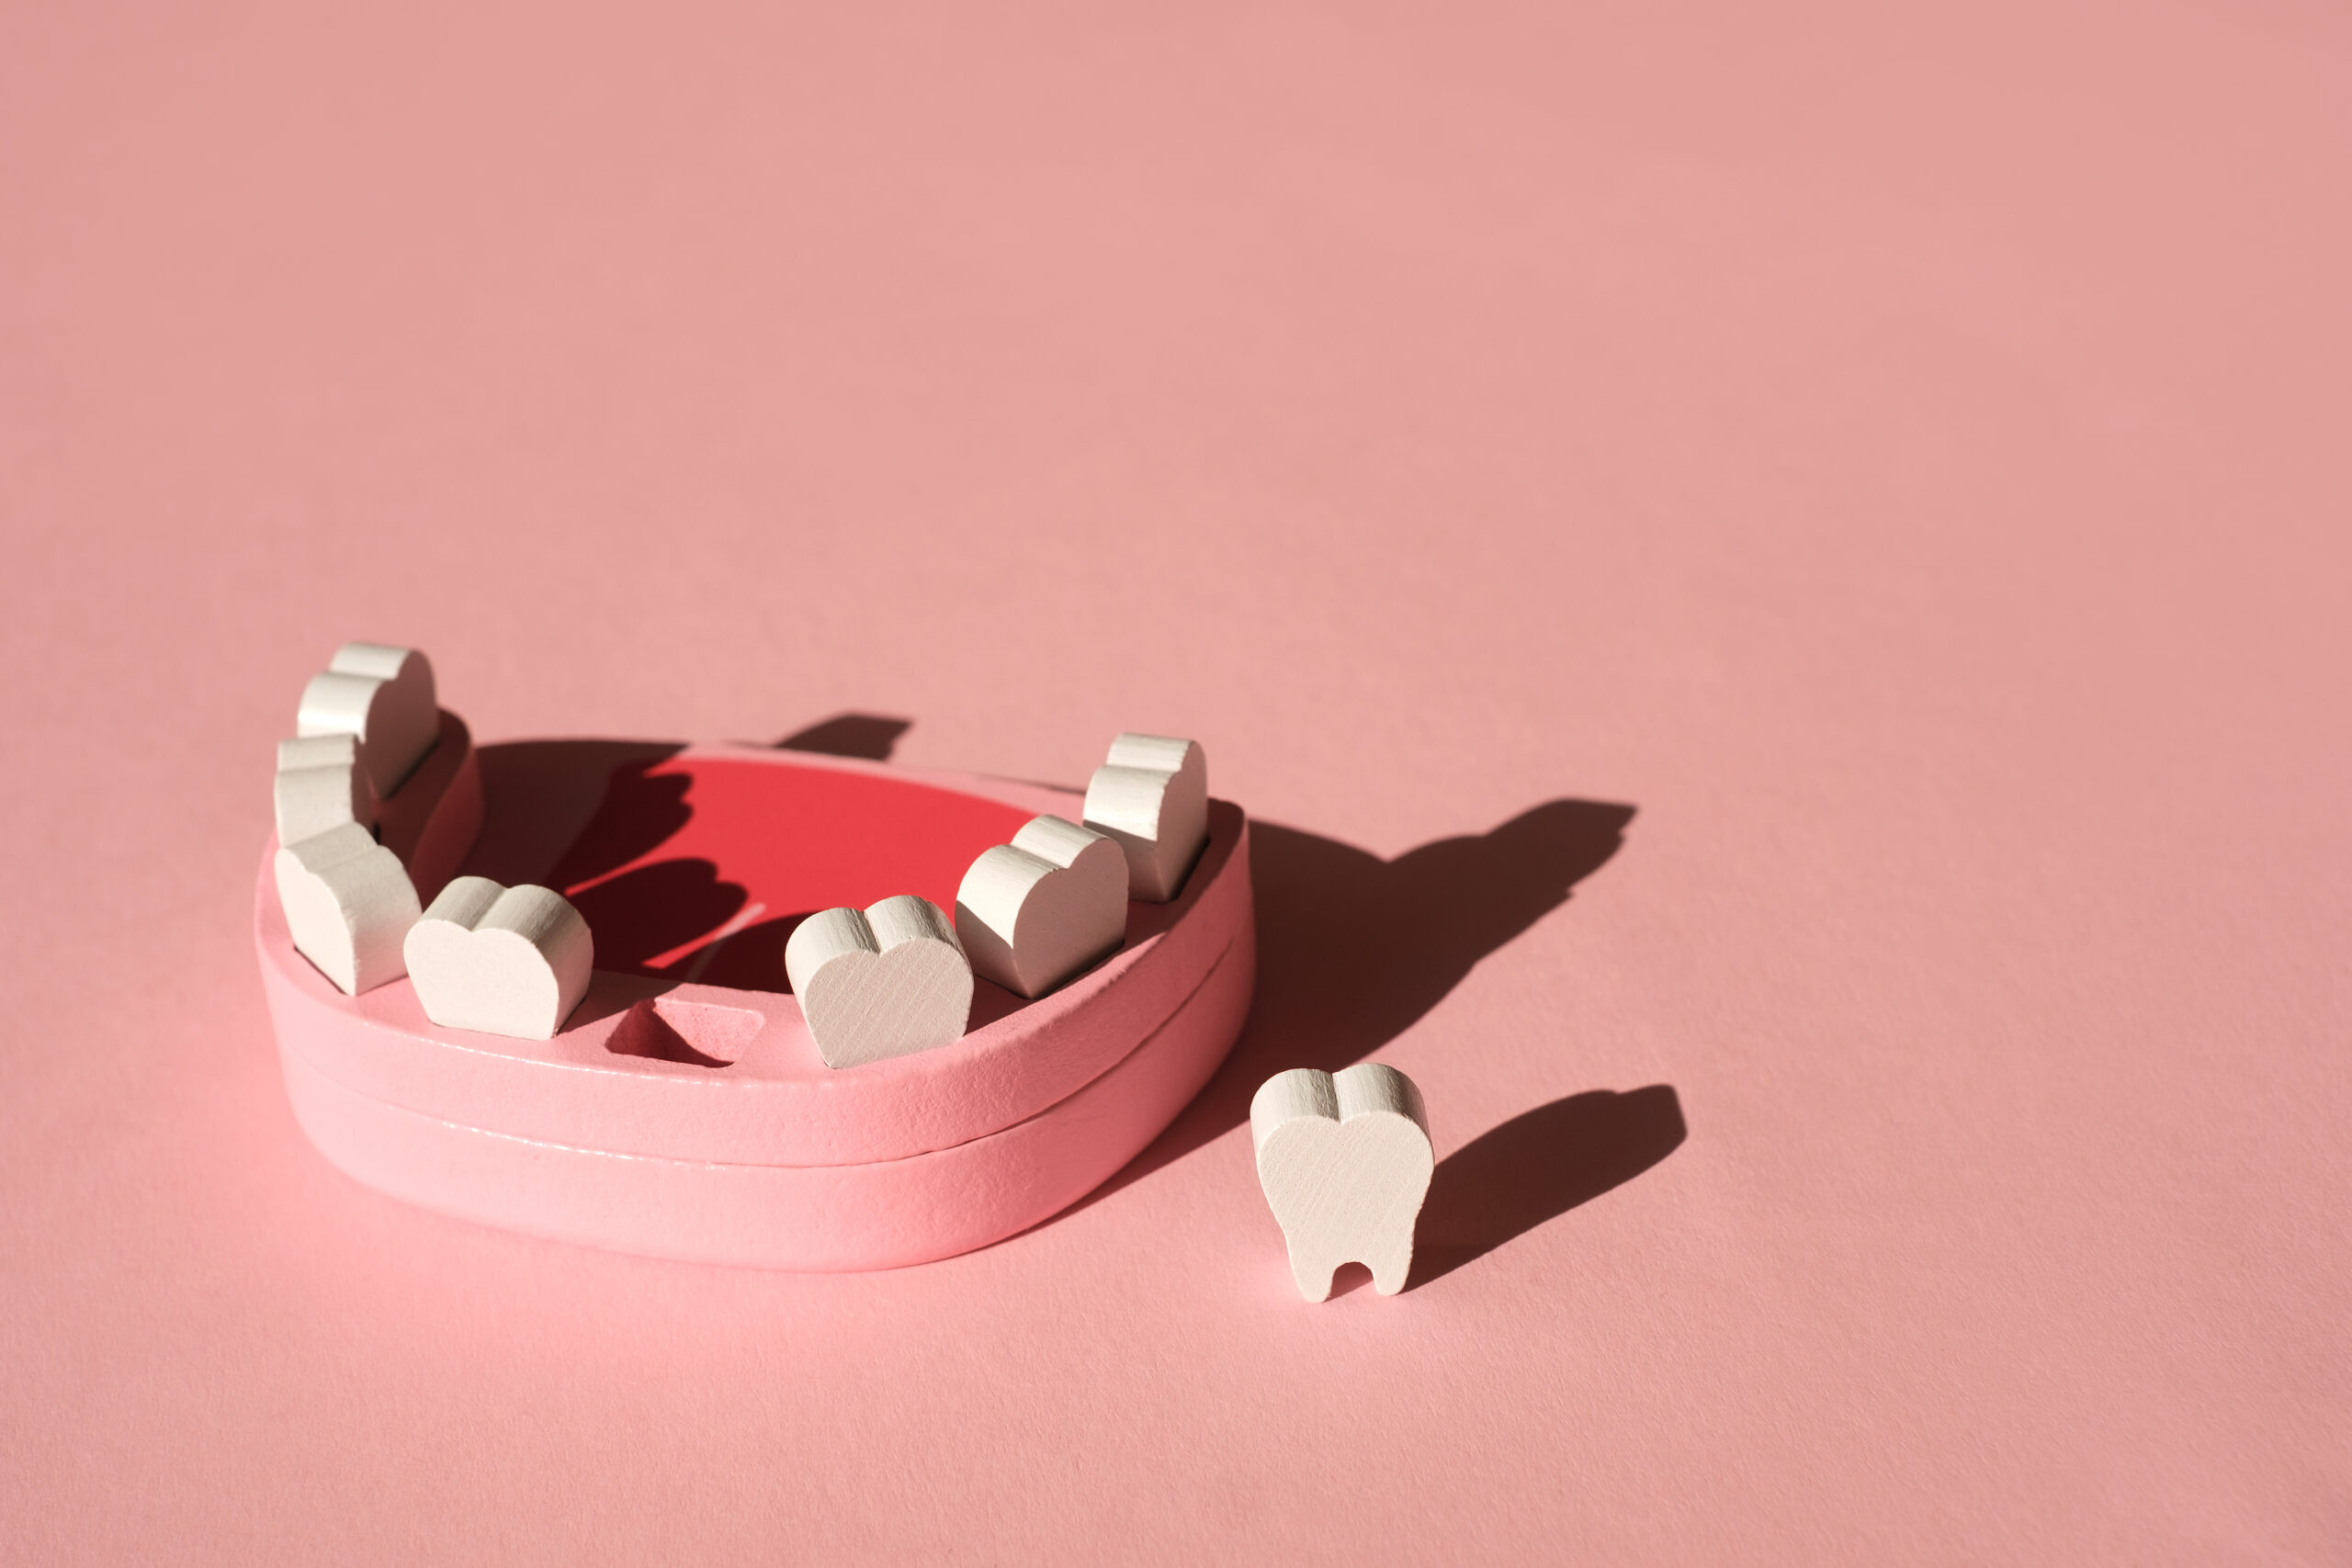 Artificial model of root teeth and milk teeth on a pink background